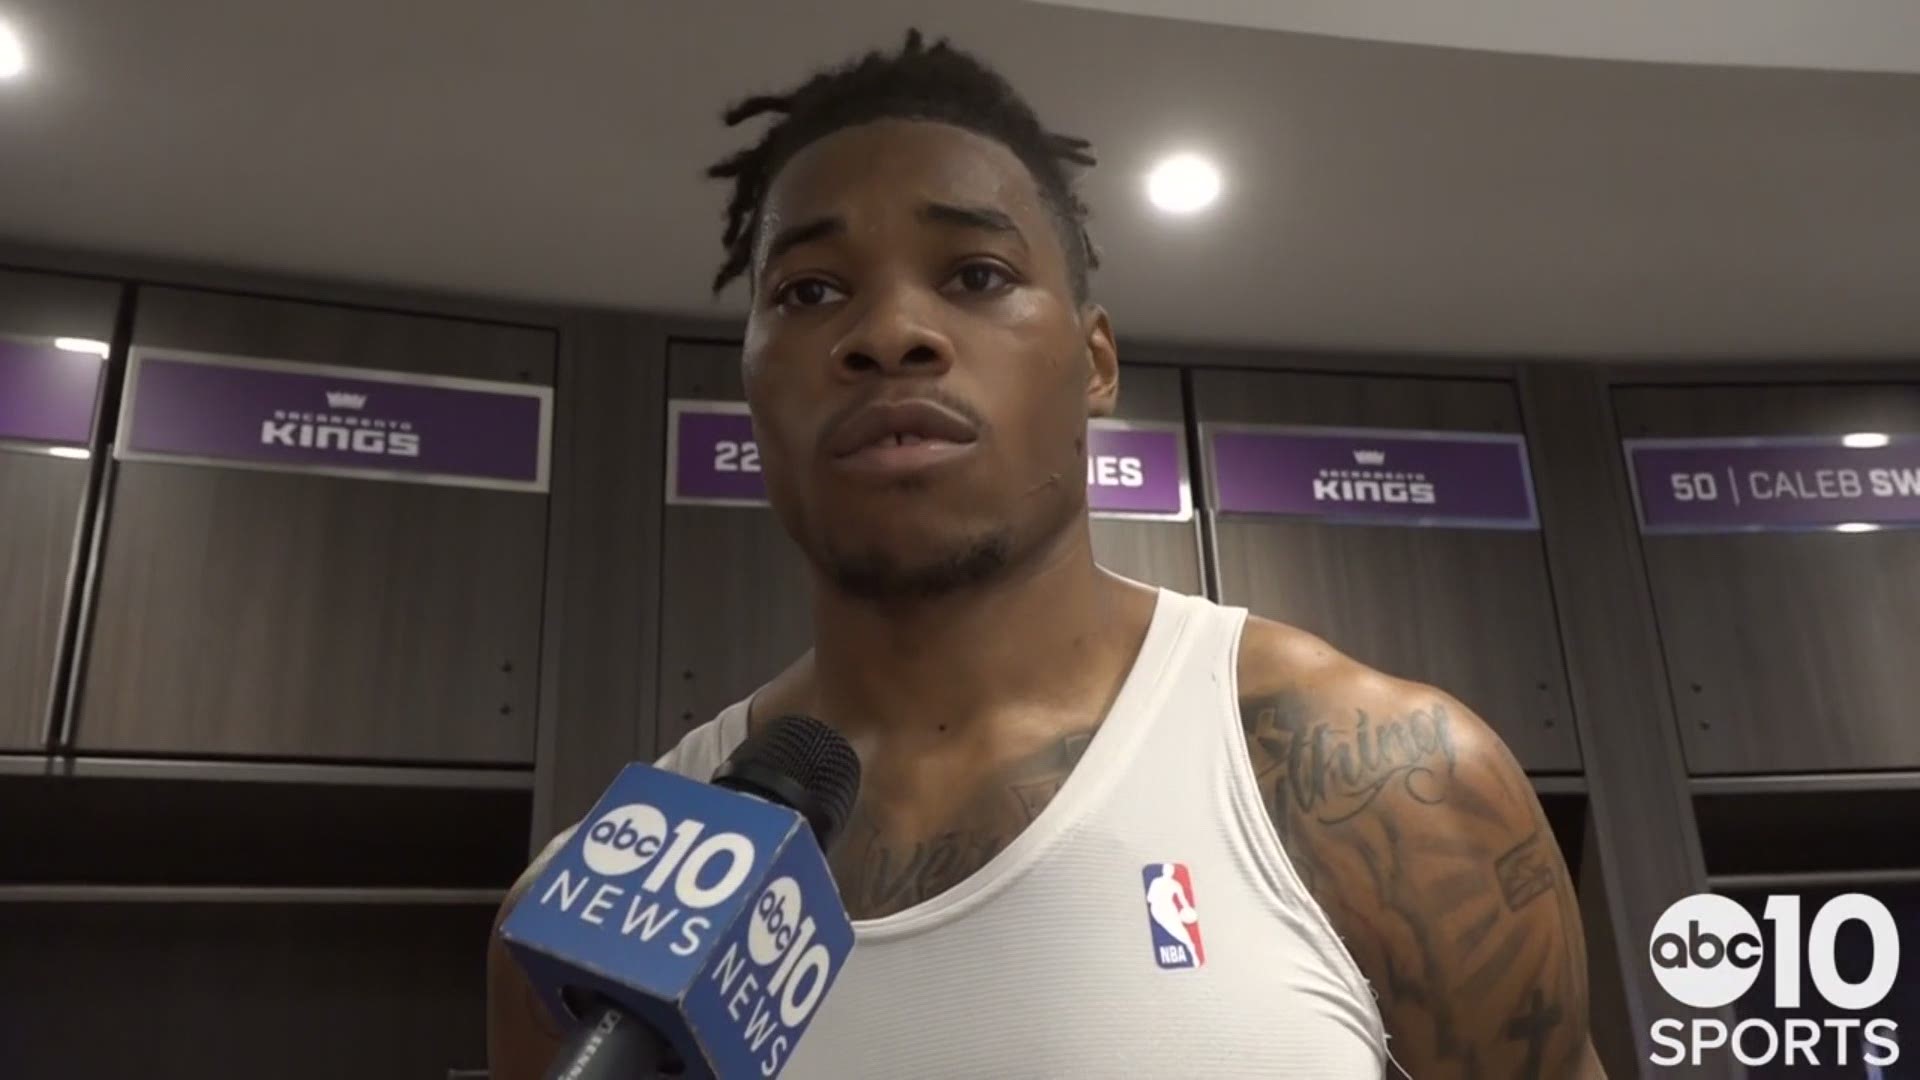 Following Tuesday's 120-116 win over the Phoenix Suns in Sacramento, Richaun Holmes talks about his Kings holding off a late rally, improving the 6-7.